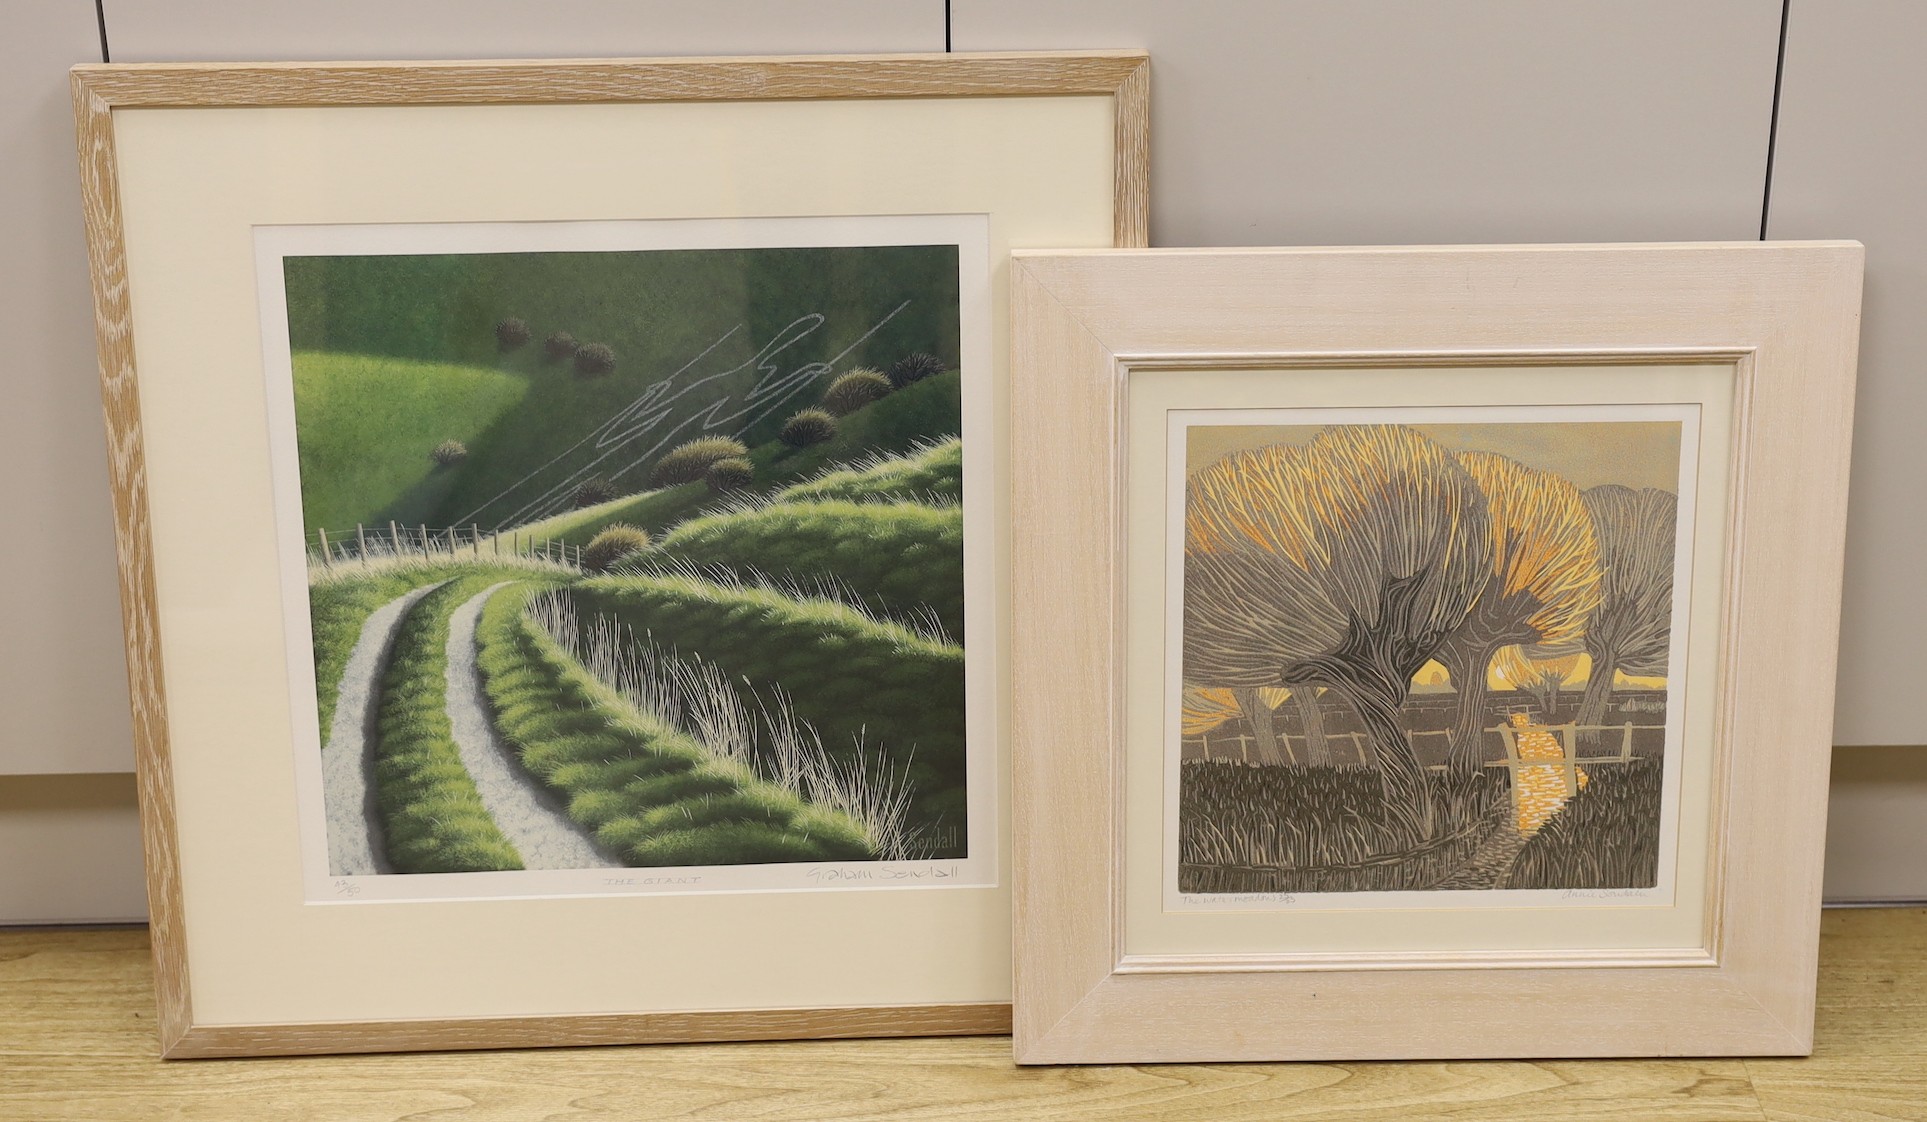 Graham Sendall (1947-) & Annie Soudain, two limited edition prints, 'The Giant', 43/50 and 'The Watermeadows', 25/25, signed in pencil, 44 x 44cm and 33 x 33cm